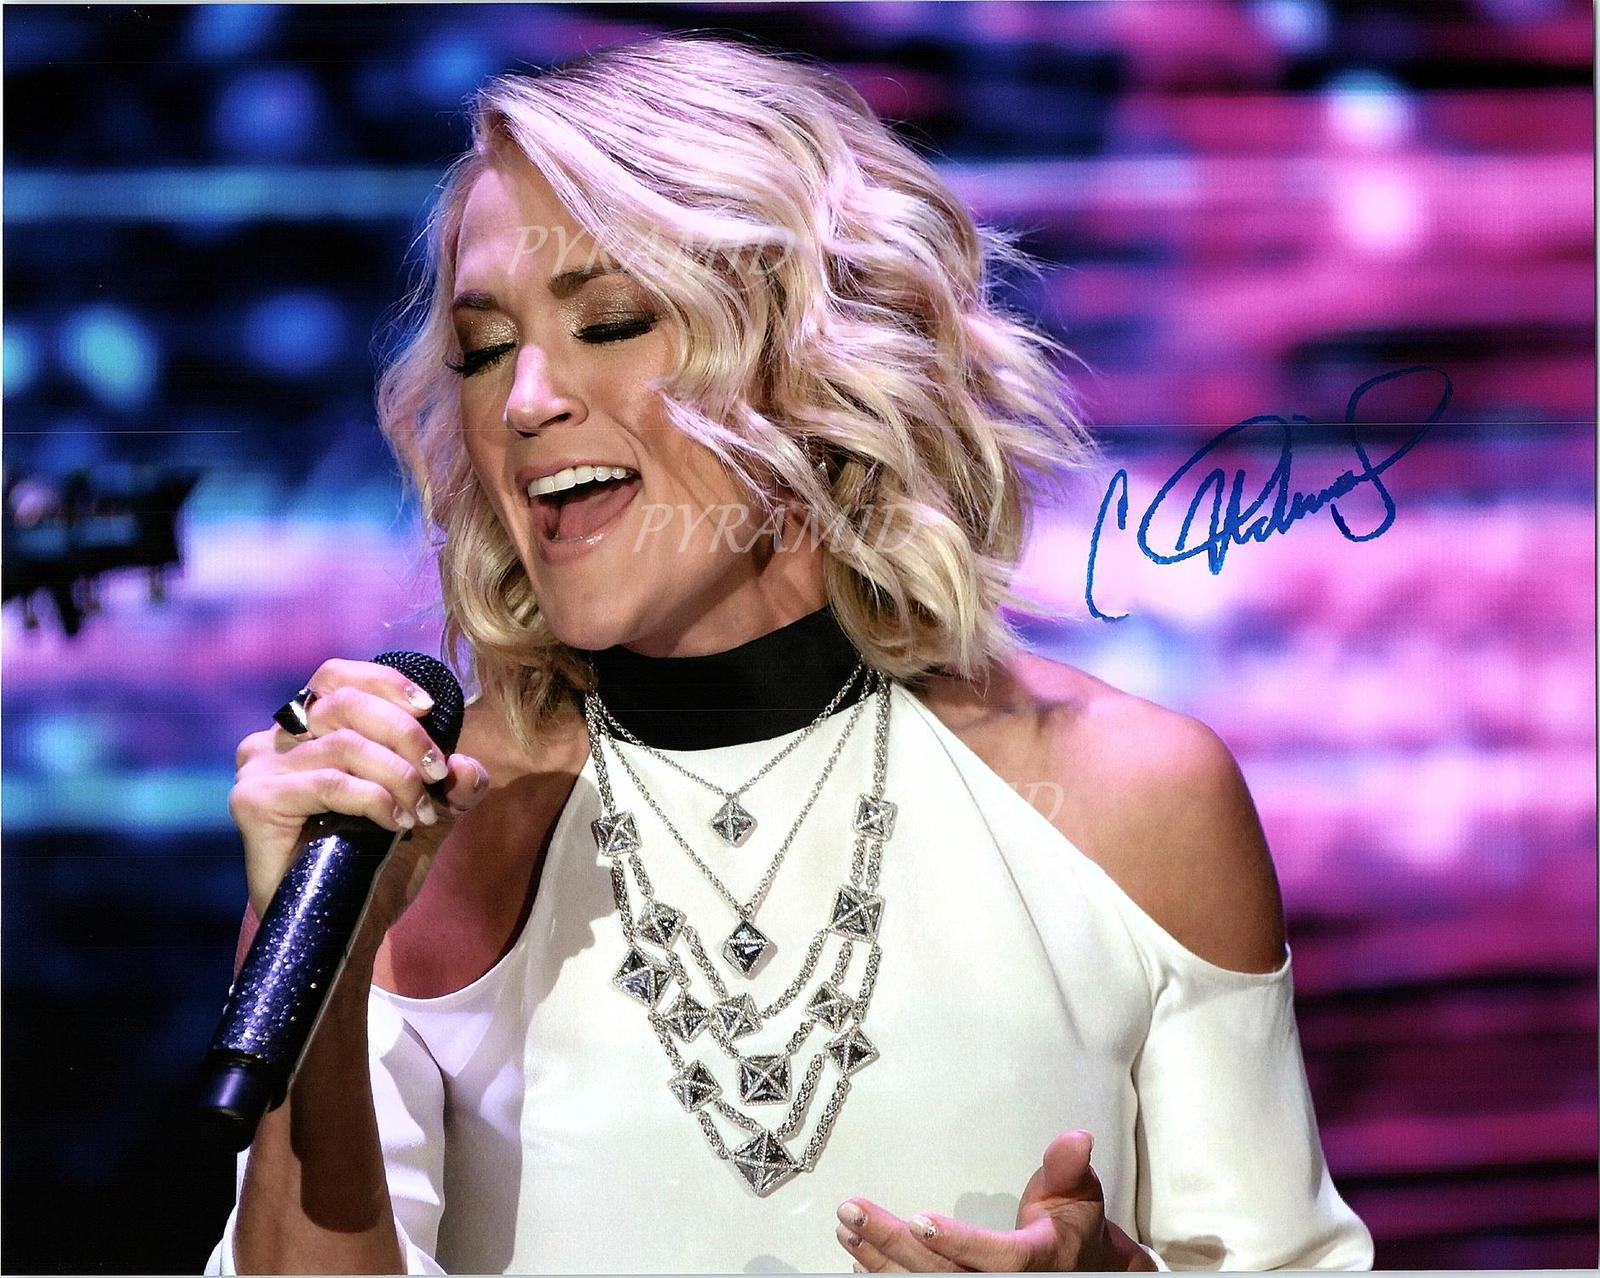 CARRIE UNDERWOOD Autographed Signed Photo w/COA - 80902 - Other